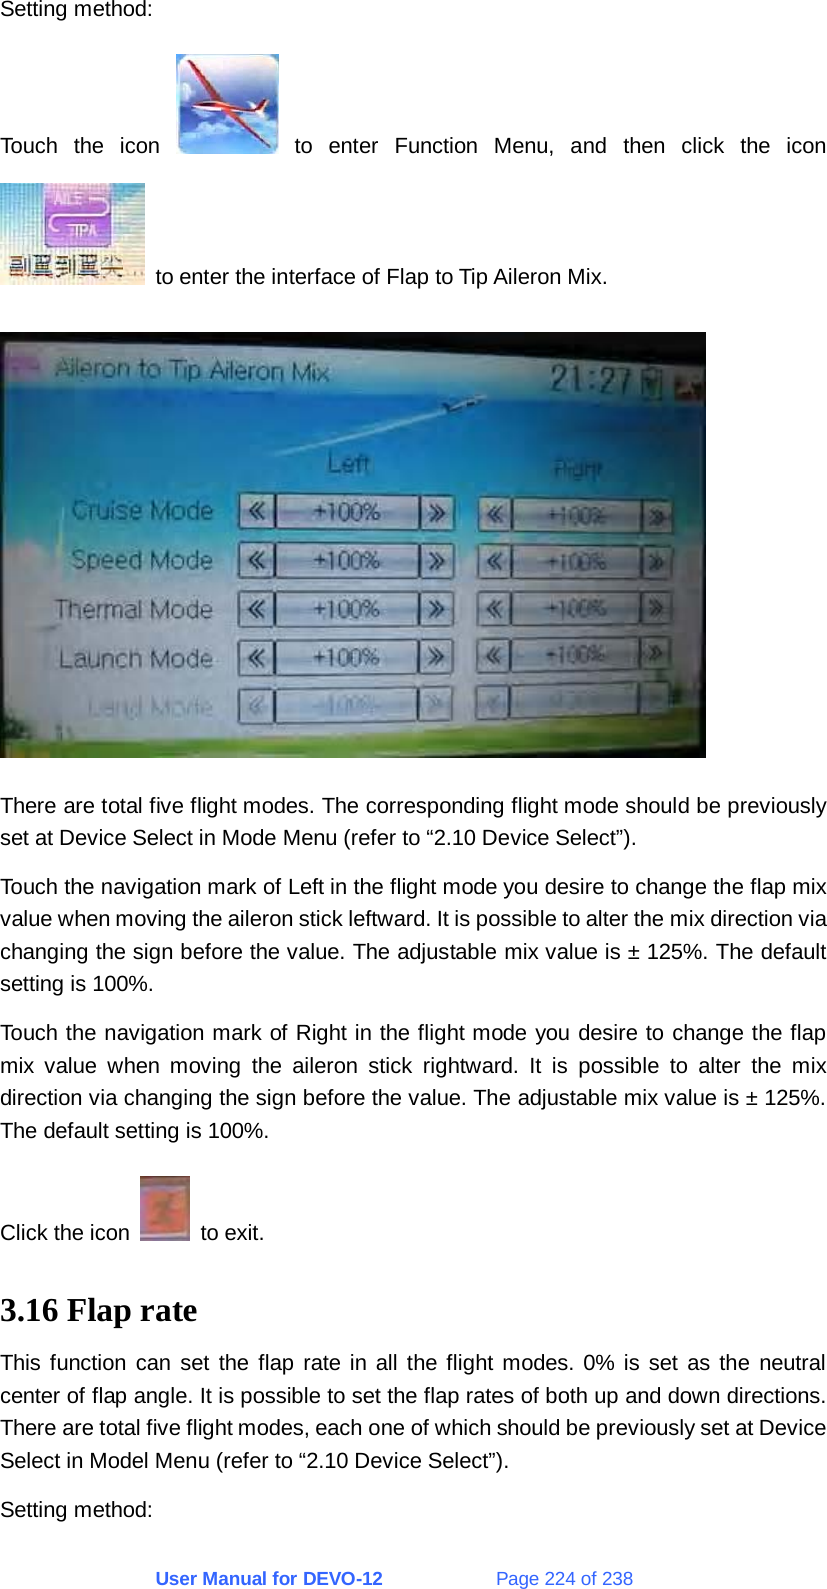 User Manual for DEVO-12             Page 224 of 238 Setting method: Touch the icon   to enter Function Menu, and then click the icon   to enter the interface of Flap to Tip Aileron Mix.  There are total five flight modes. The corresponding flight mode should be previously set at Device Select in Mode Menu (refer to “2.10 Device Select”). Touch the navigation mark of Left in the flight mode you desire to change the flap mix value when moving the aileron stick leftward. It is possible to alter the mix direction via changing the sign before the value. The adjustable mix value is ± 125%. The default setting is 100%. Touch the navigation mark of Right in the flight mode you desire to change the flap mix value when moving the aileron stick rightward. It is possible to alter the mix direction via changing the sign before the value. The adjustable mix value is ± 125%. The default setting is 100%. Click the icon   to exit. 3.16 Flap rate This function can set the flap rate in all the flight modes. 0% is set as the neutral center of flap angle. It is possible to set the flap rates of both up and down directions. There are total five flight modes, each one of which should be previously set at Device Select in Model Menu (refer to “2.10 Device Select”). Setting method: 